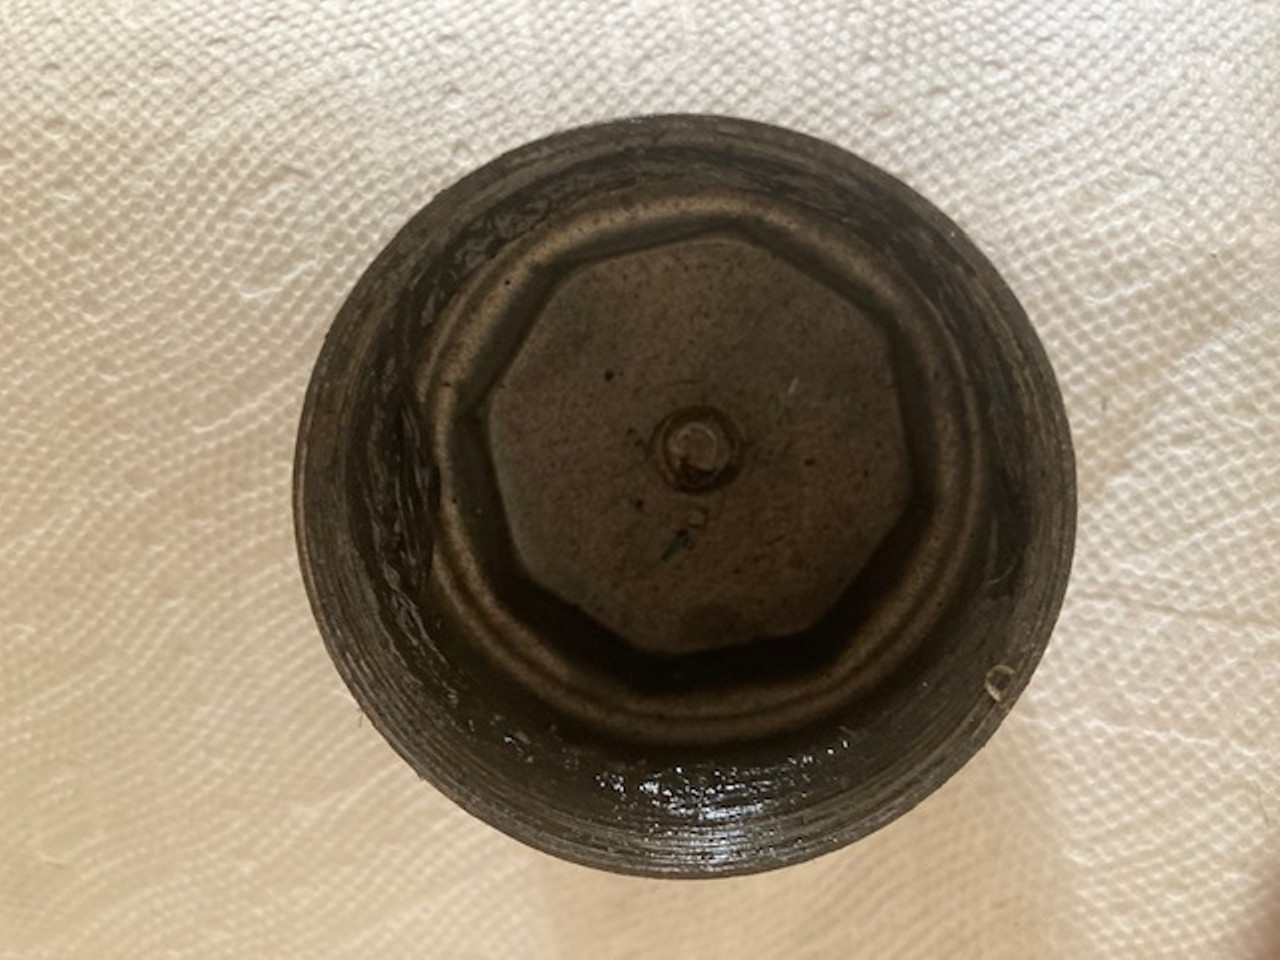 Screw on Grease Cap for 12" hub - cracked